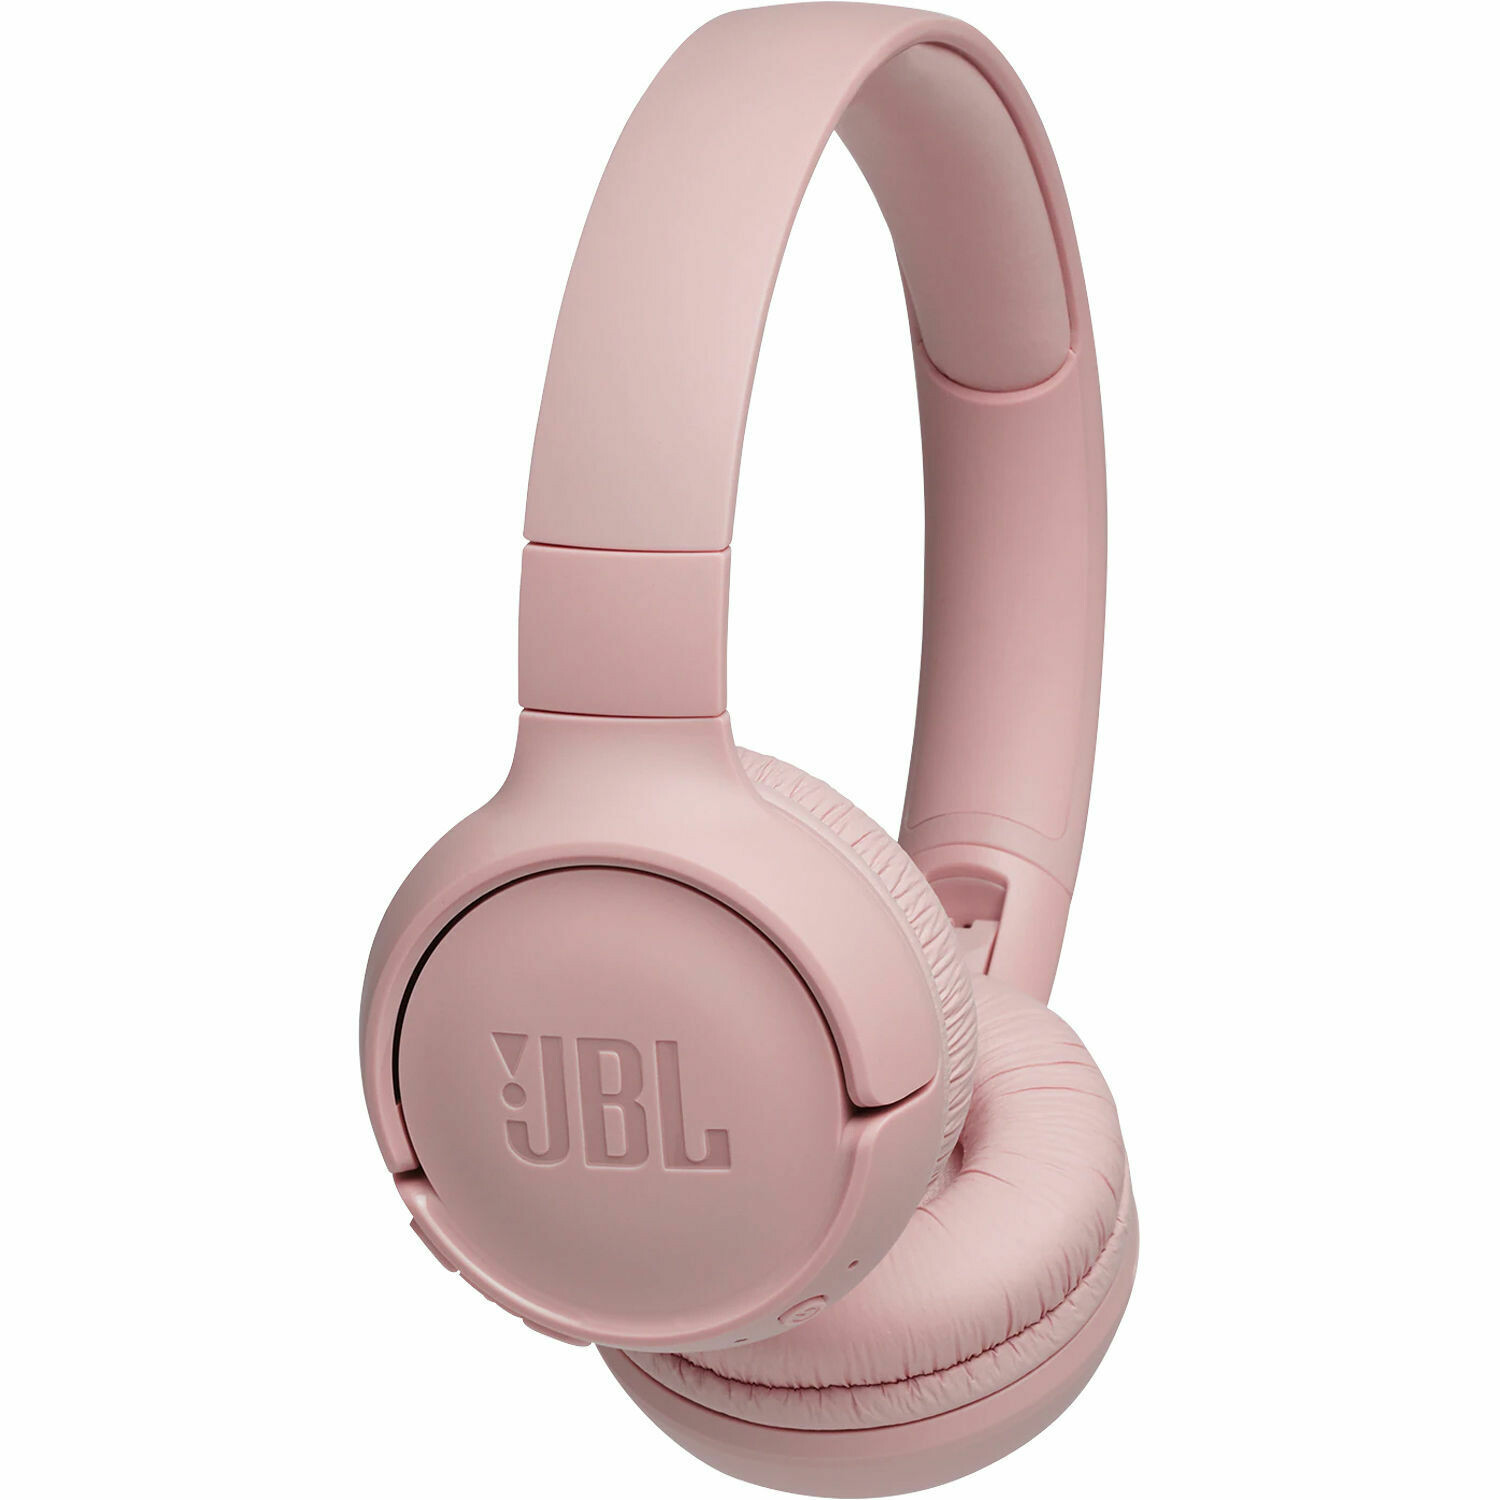 JBL Tune 500BT Wireless On-Ear Headphones with Voice Assistant (Pink)